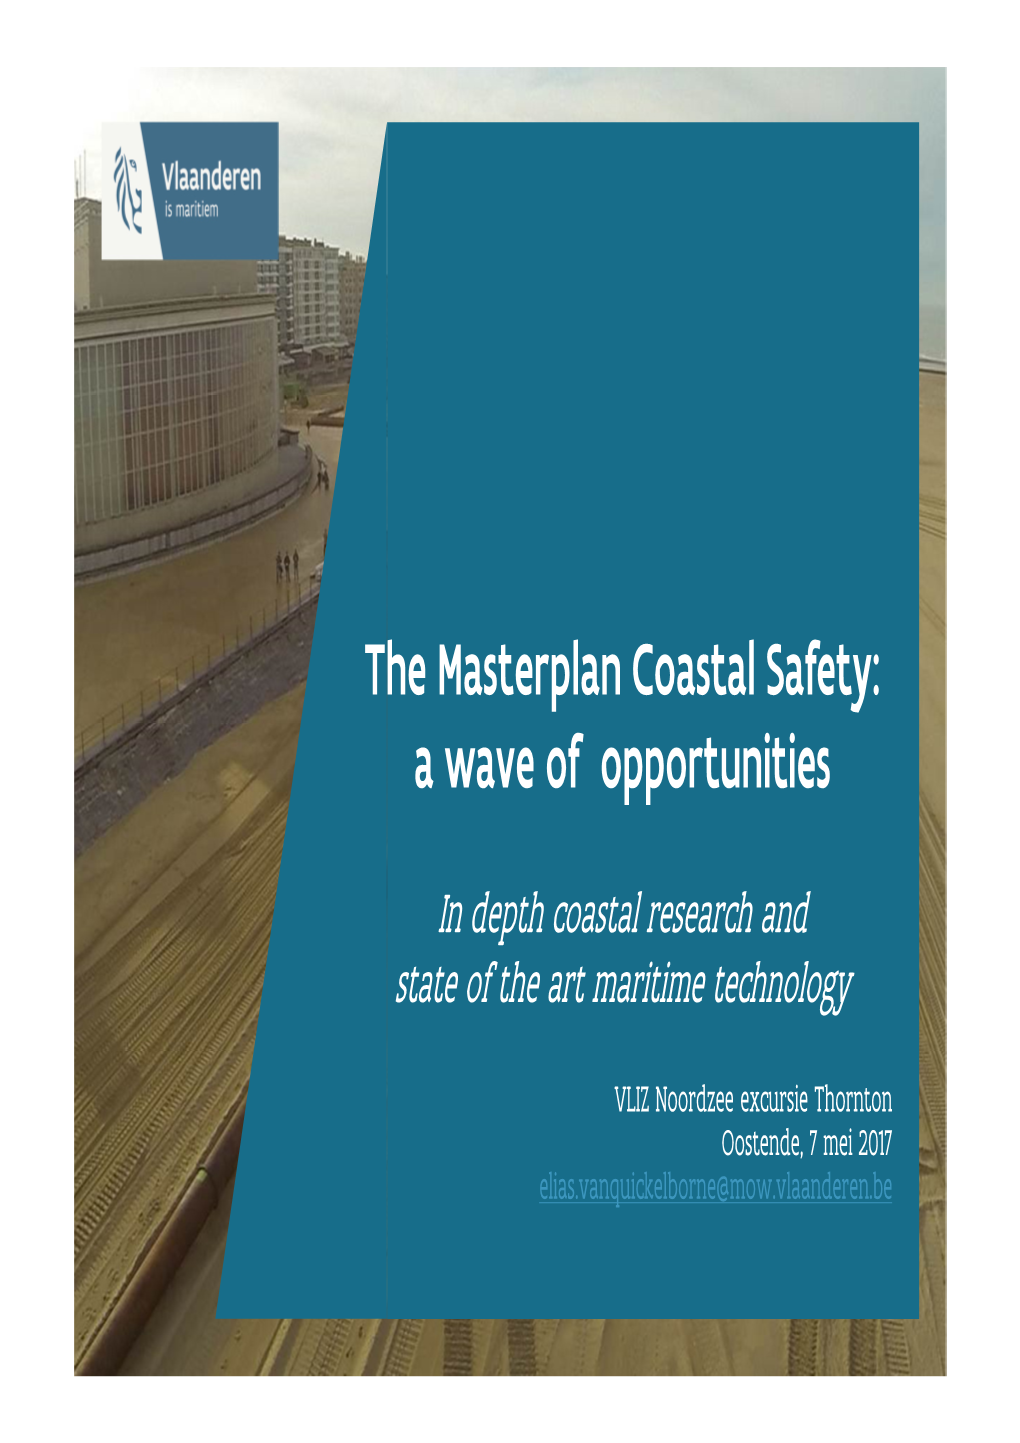 The Masterplan Coastal Safety: a Wave of Opportunities